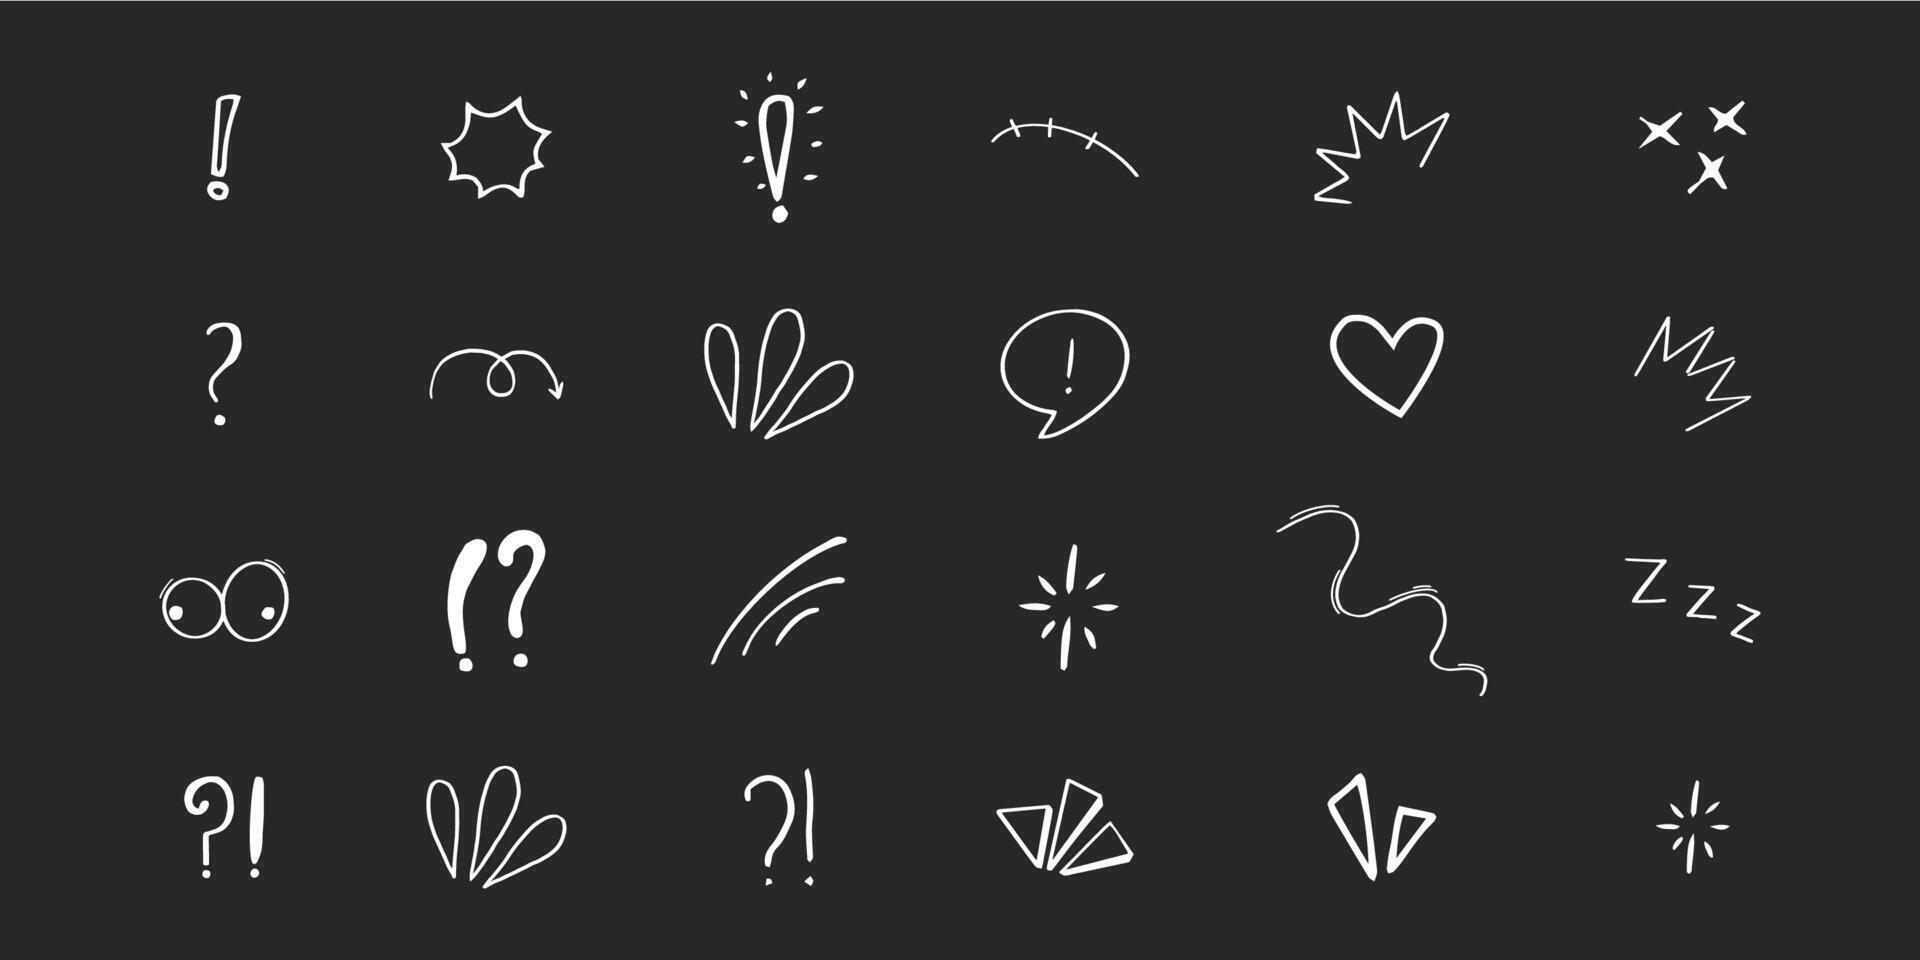 Set anime emotion effect attention elements, expressions speech bubble white in comic doodle style isolated on dark background. illustration vector